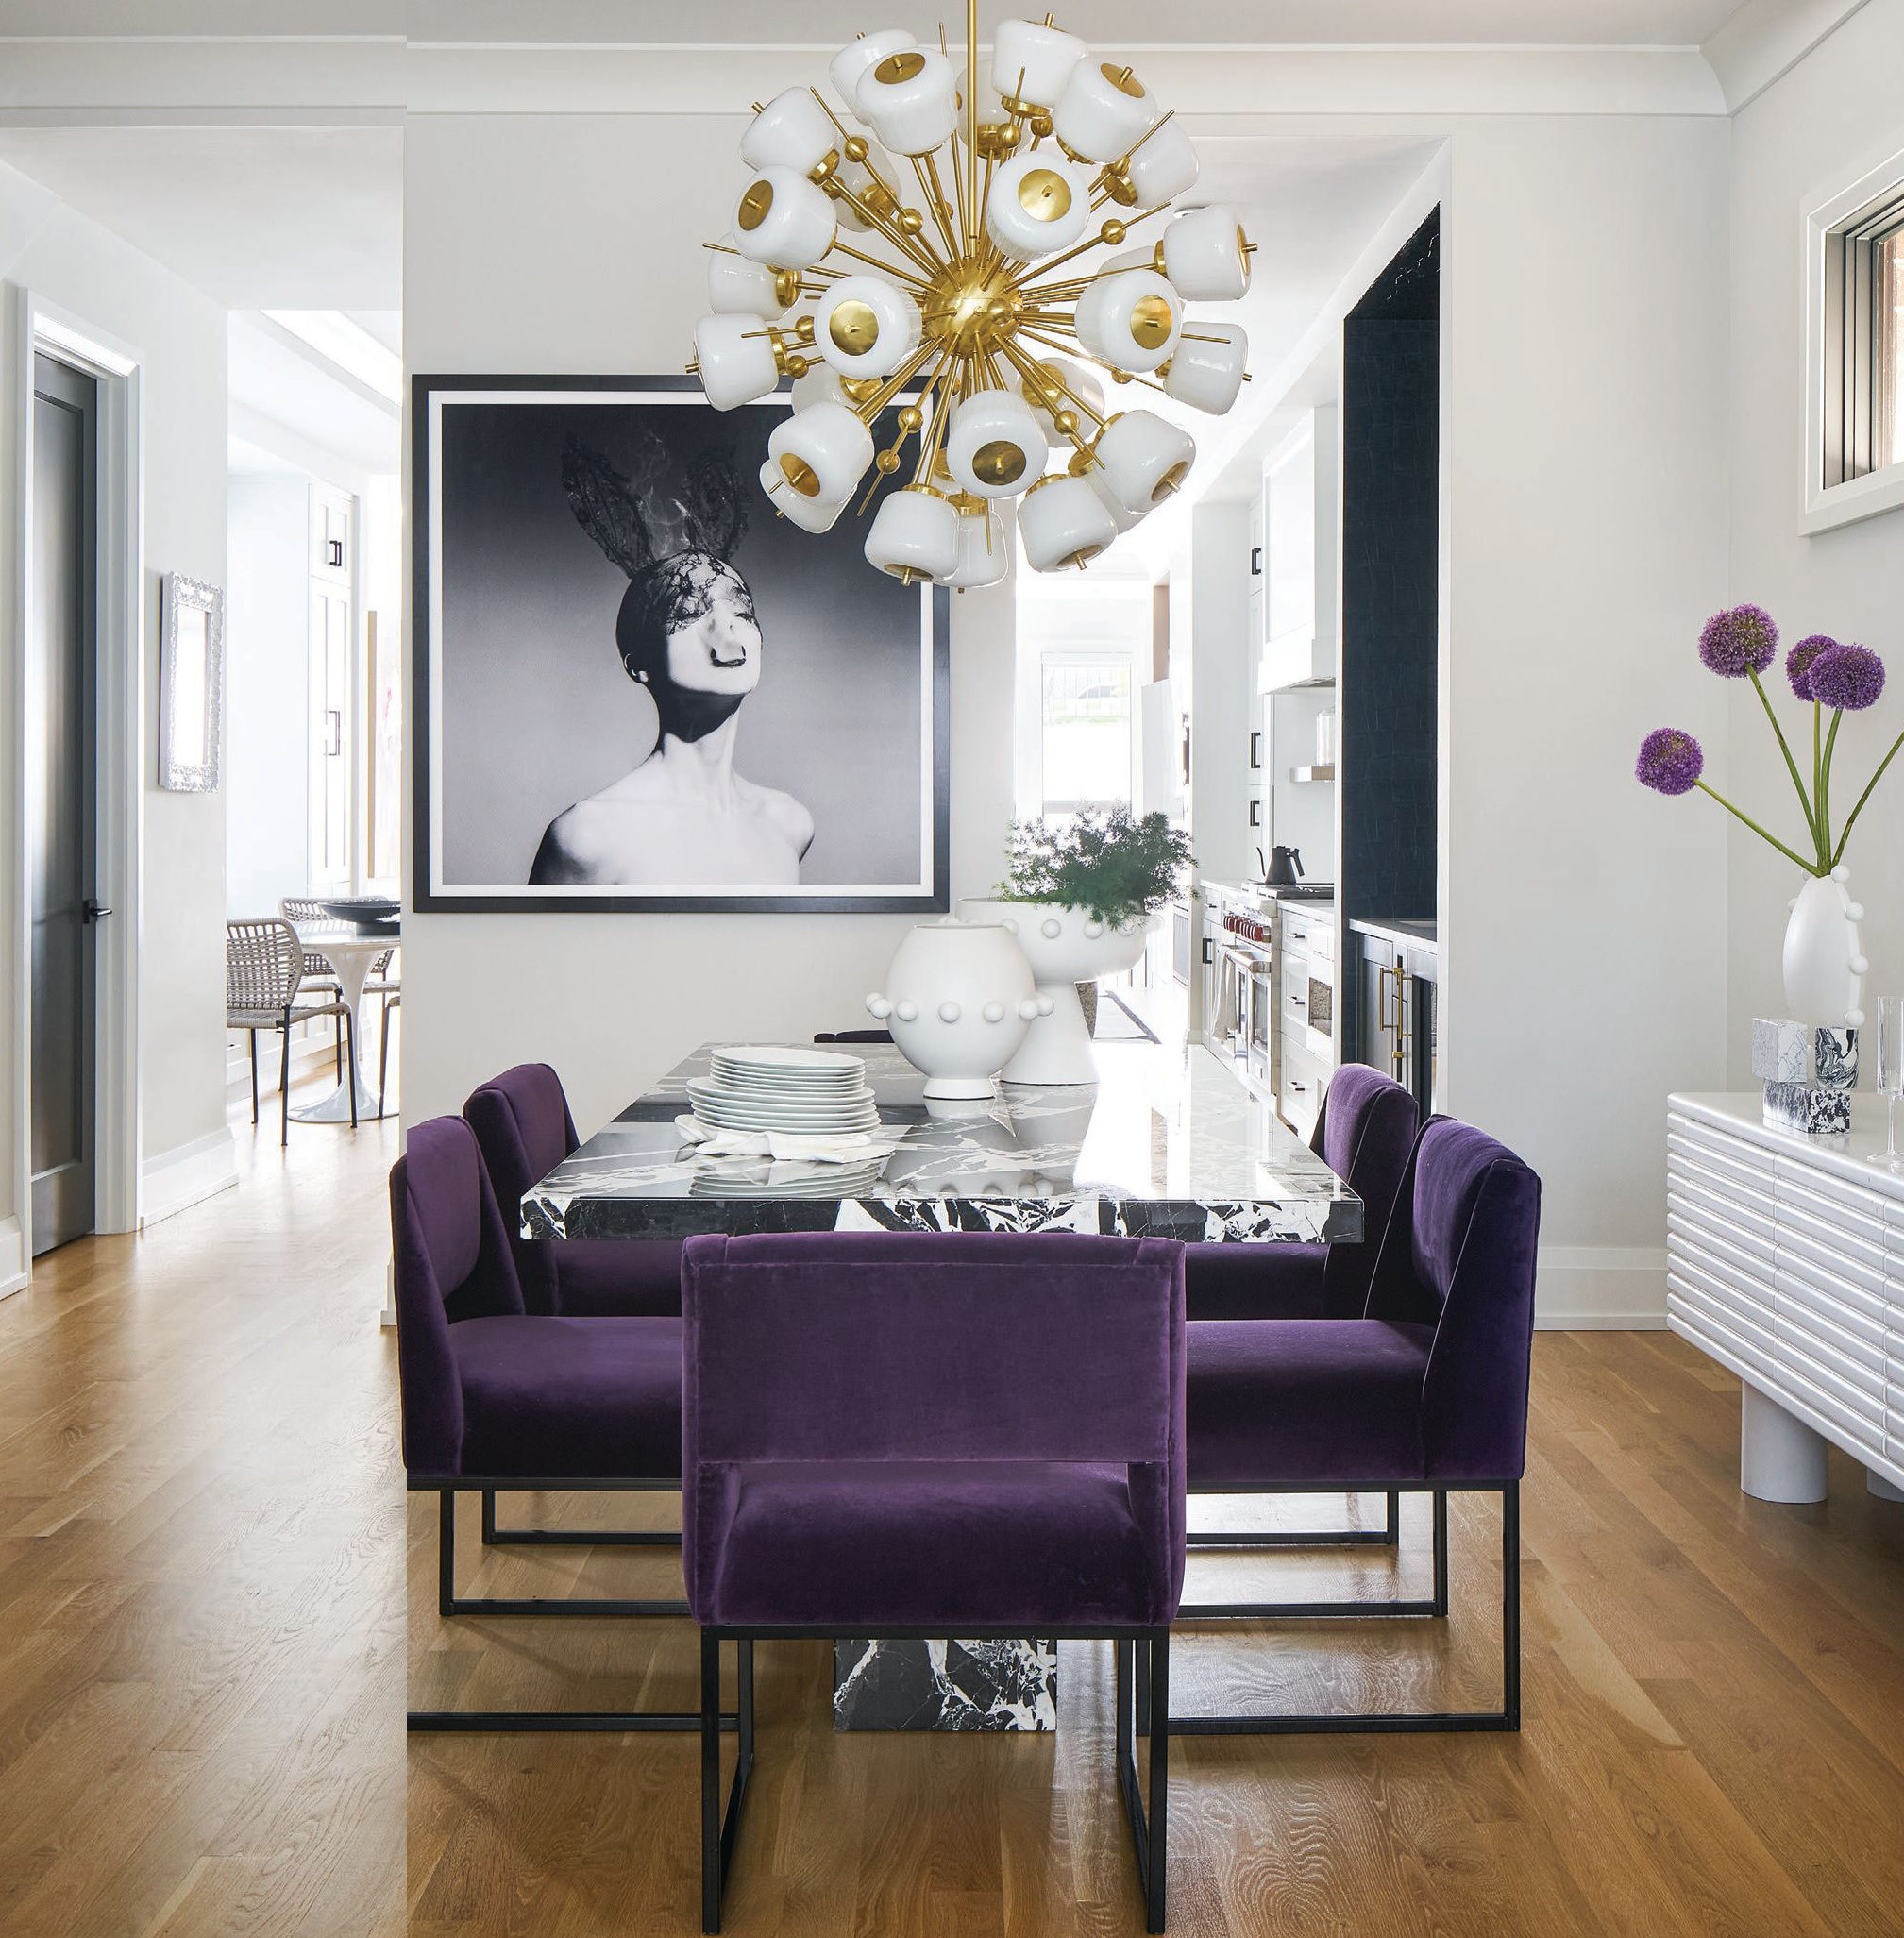 A custom marble slab table and vintage Sputnik chandelier from Venfield
in NYC add extra elegance, while bold art from Tyler Shields (@thetylershields)
and Jenna Krypell (@jennakrypellstudio) complement the room’s purple tones. PHOTOGRAPHED BY RYAN MCDONALD